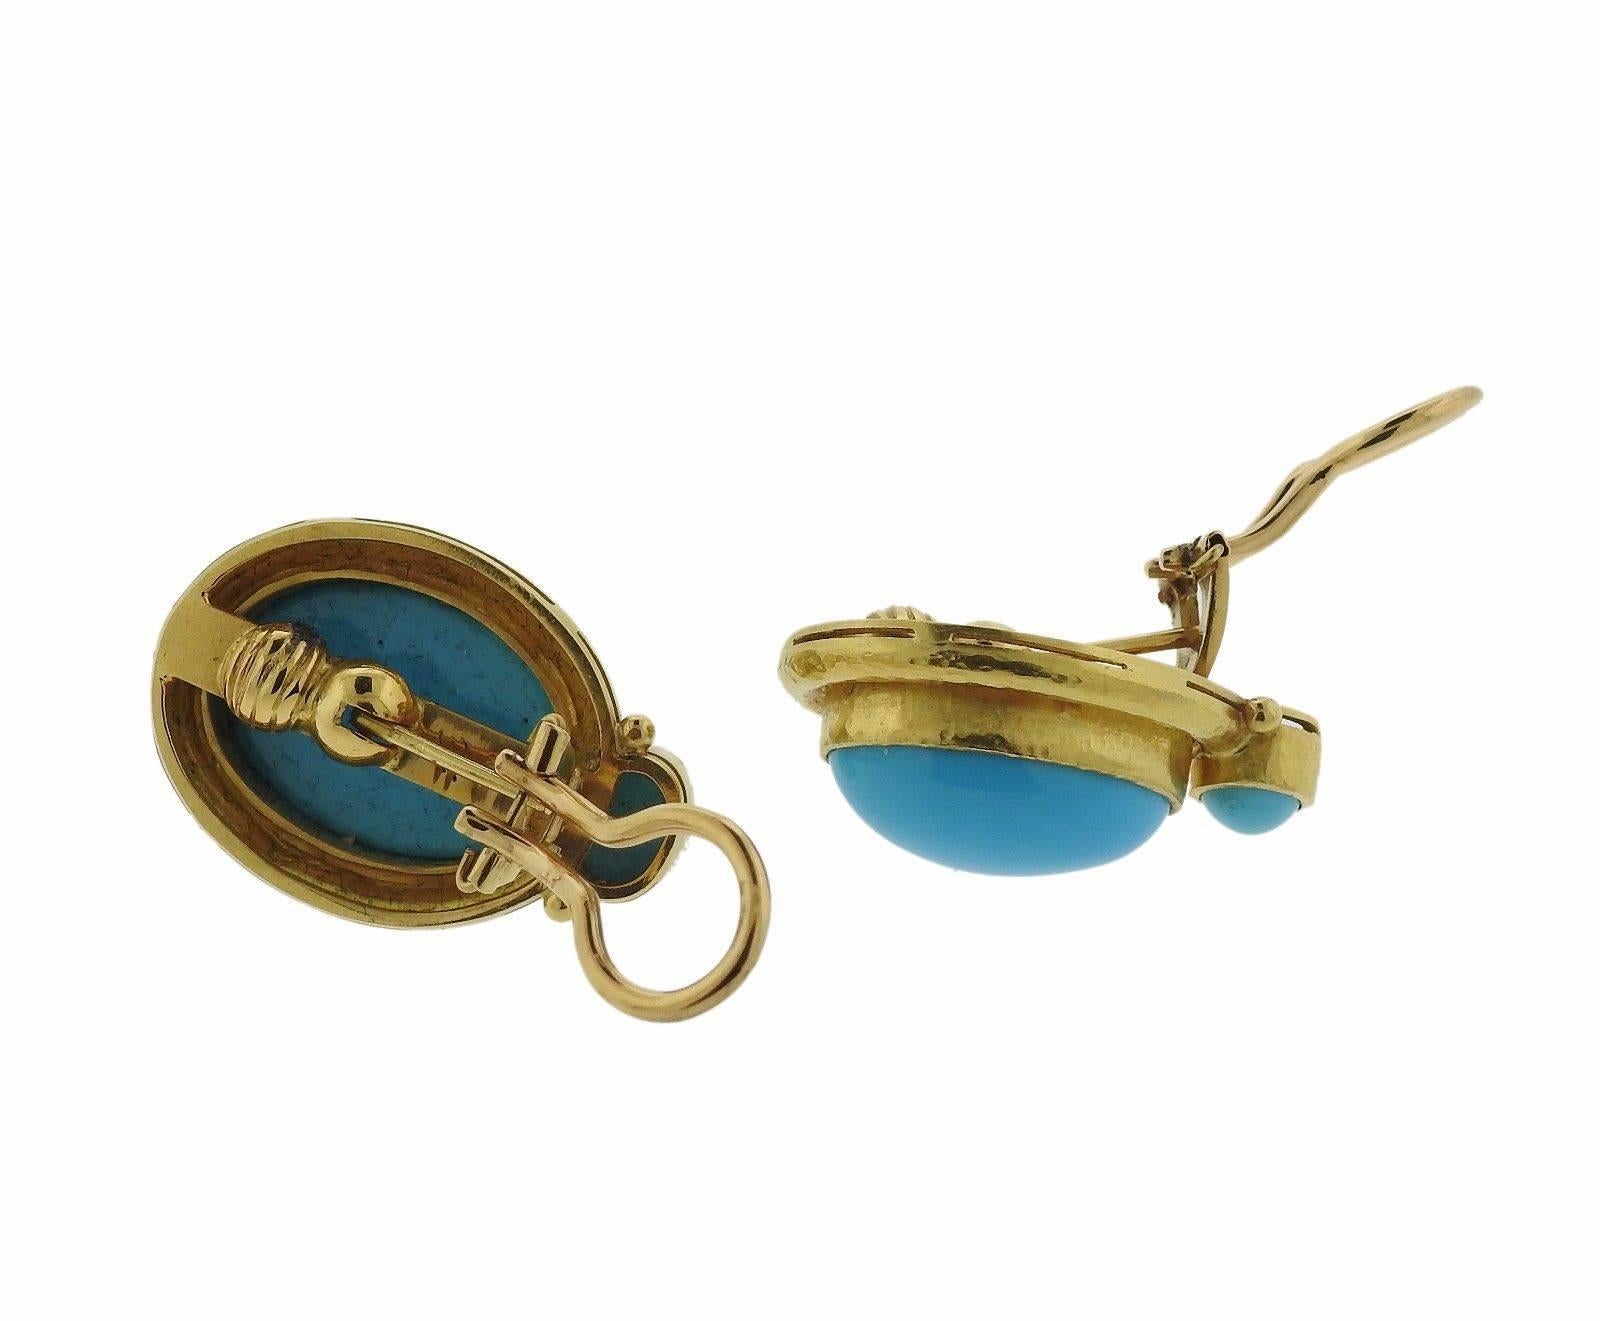 A pair of 18k yellow gold earring set with turquoise.  The earrings measure 28mm x 19mm and weigh 20.7 grams.  Marked: 18k, Elizabeth Locke Hallmark.